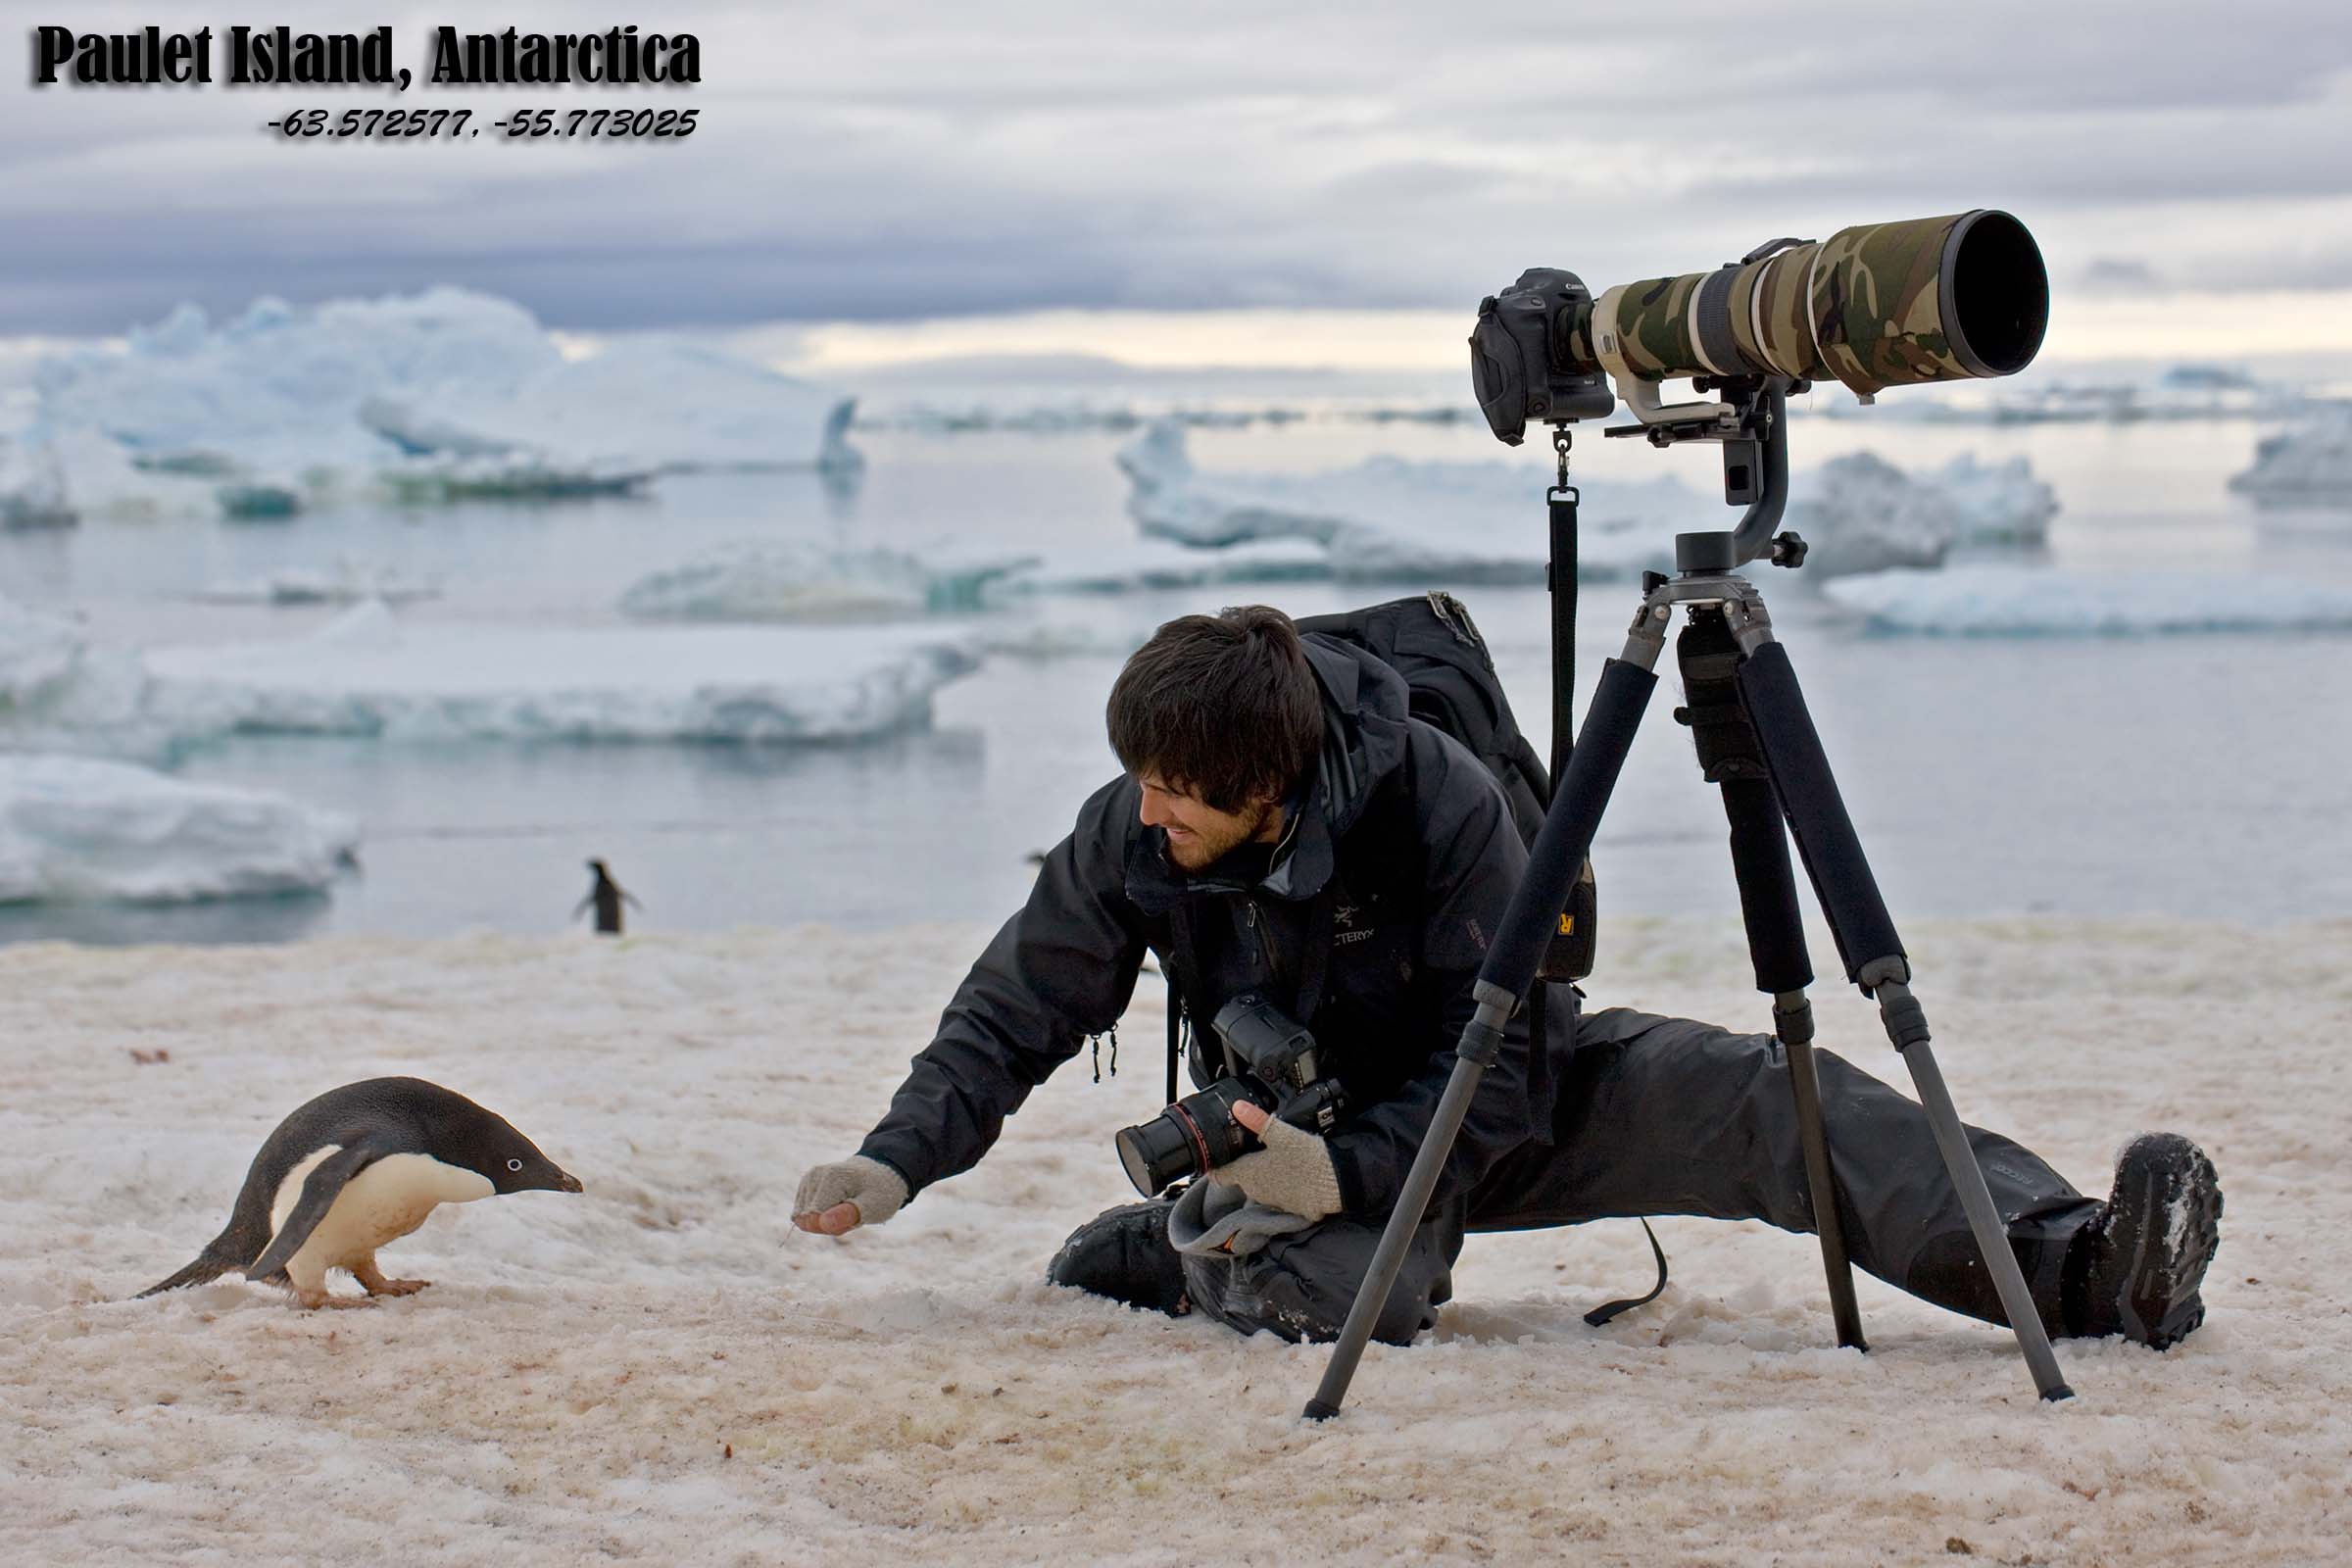 Christopher making friends with an Adelie Penguin on Antartica